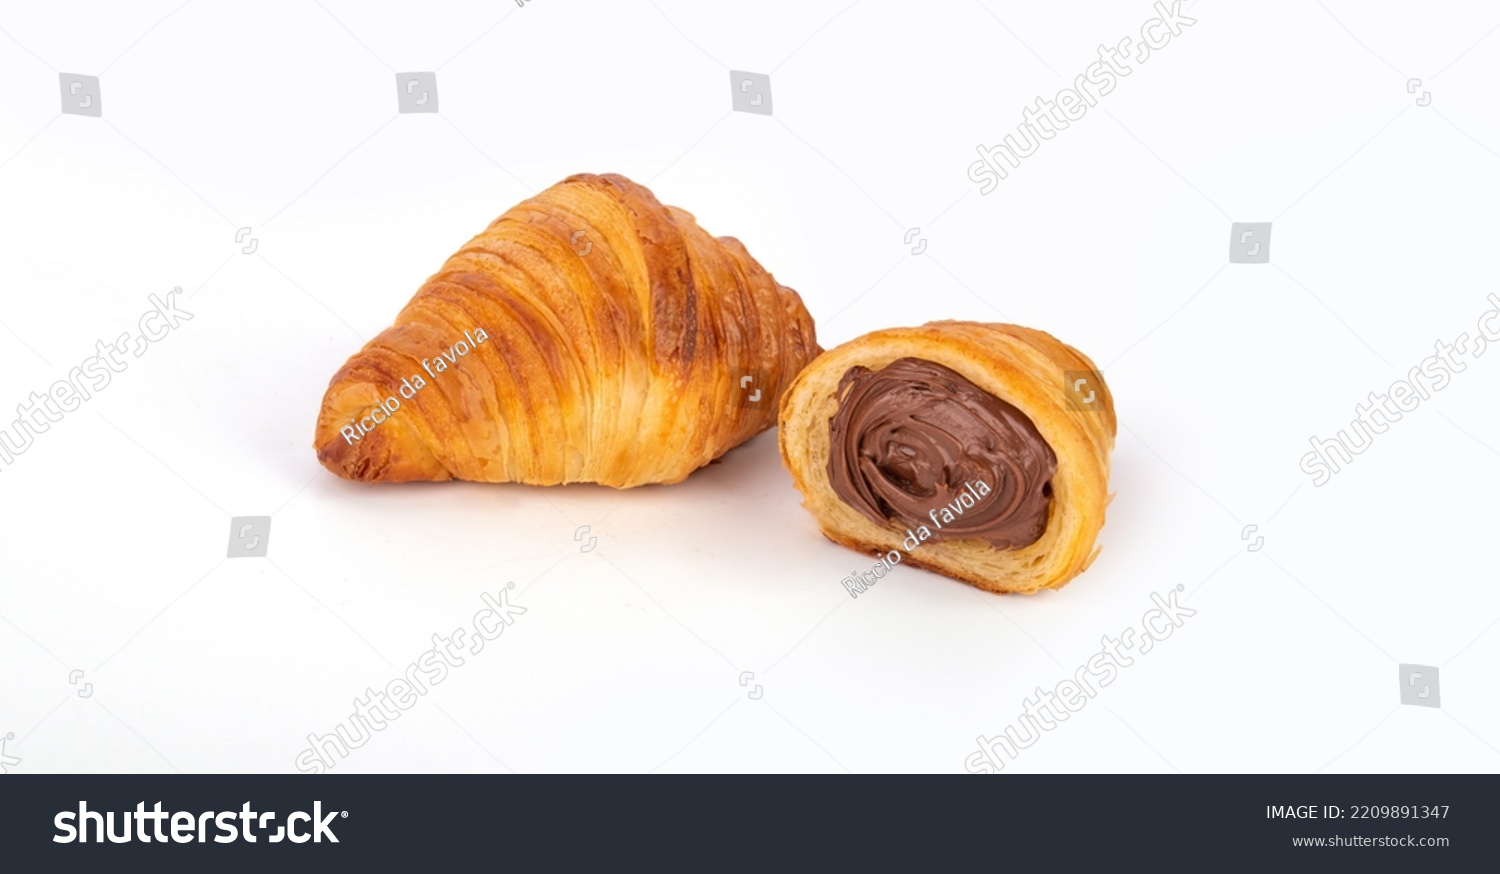 Fresh croissants with chocolate. Croissant with chocolate filling with shadows on a white background. Fresh french croissant. Italian pastry #2209891347